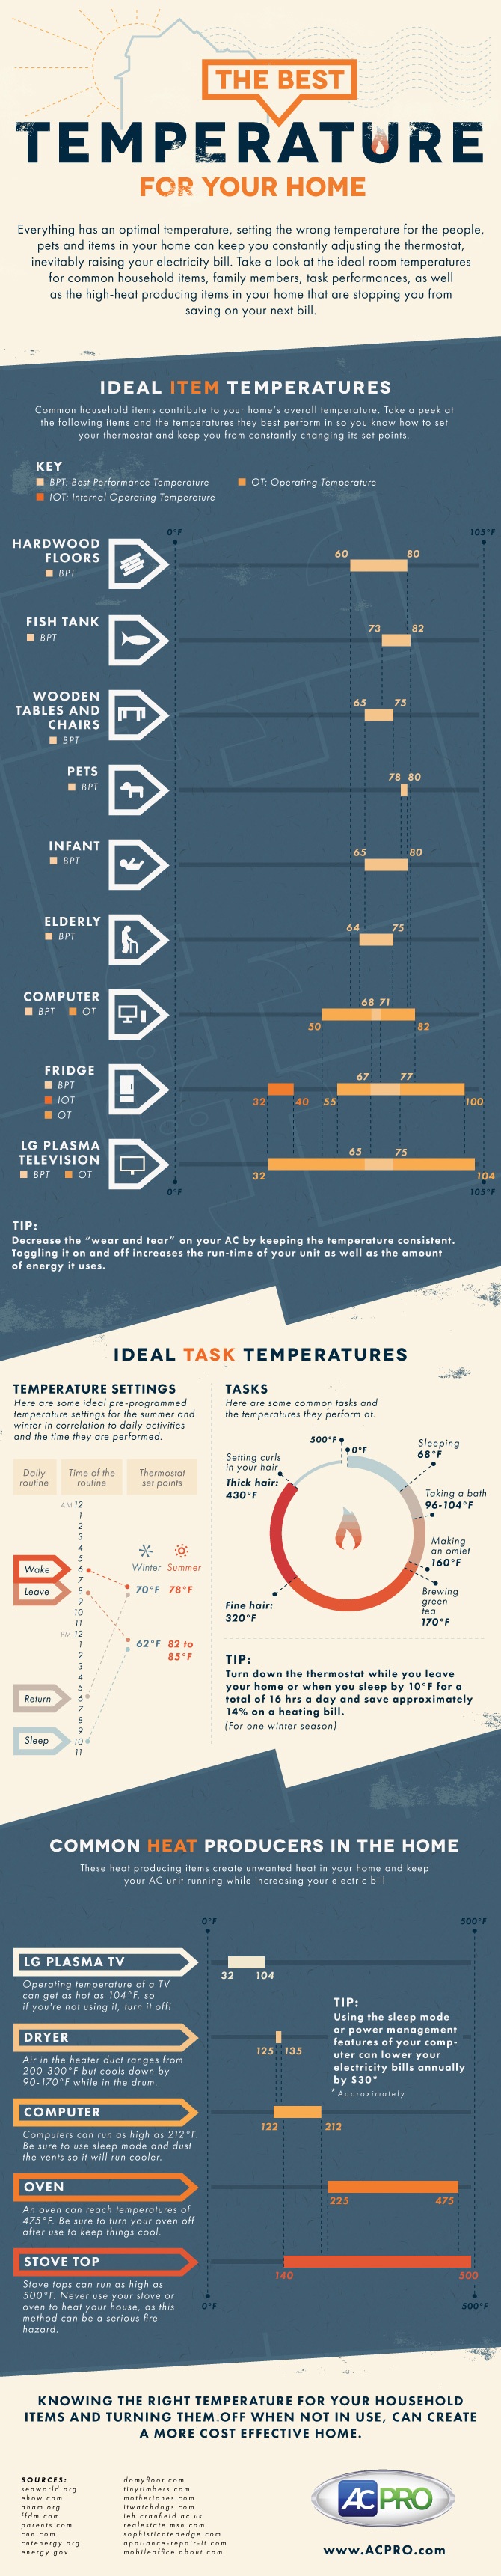 The Best Temperature For Your Home Infographic